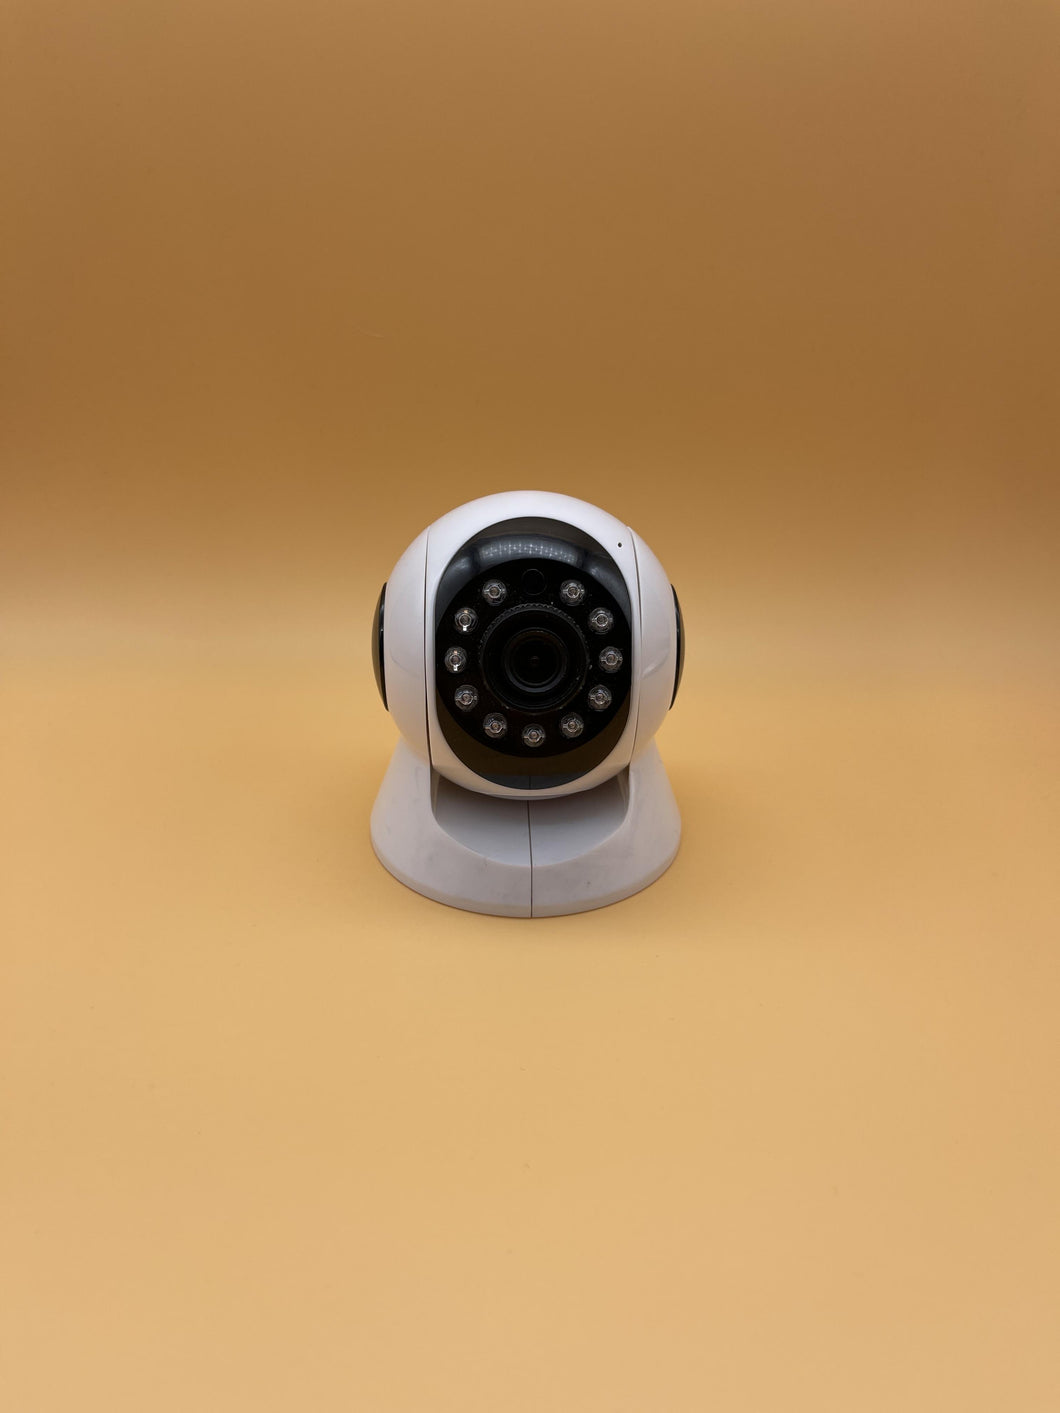 Hdoomi Webcams,4k webcam auto focus, HD Webcam with Microphone, Software Control & Privacy Cover, Hdoomi Webcams Computer Camera, 110-degree FOV, Plug and Play, for Zoom/Skype/Teams, Conferencing and Video Calling